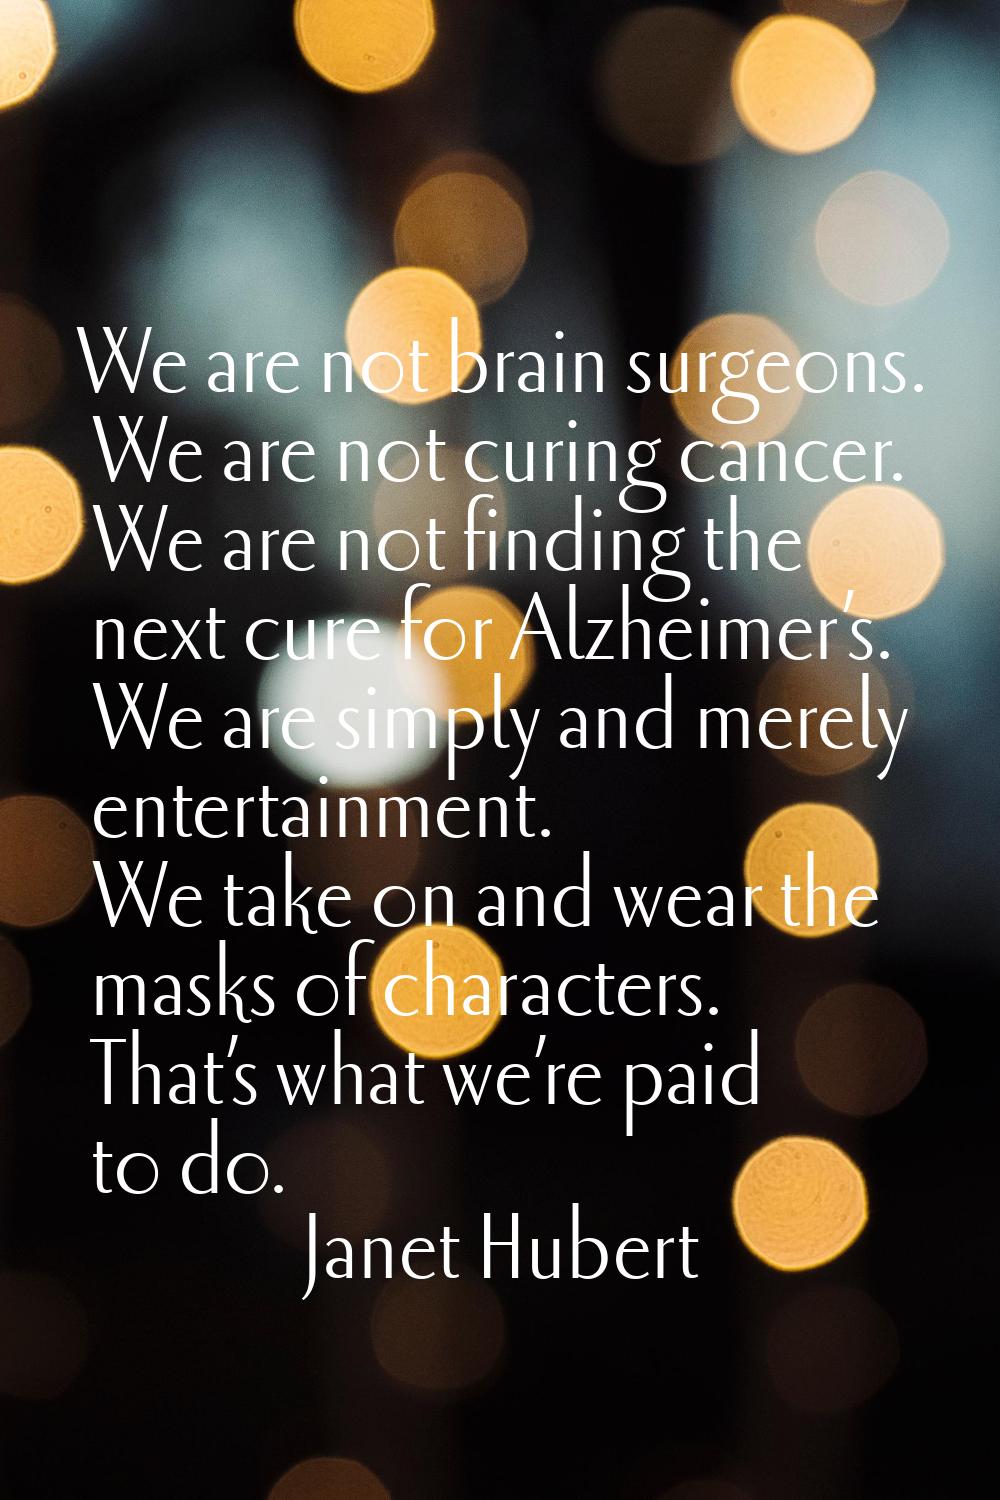 We are not brain surgeons. We are not curing cancer. We are not finding the next cure for Alzheimer